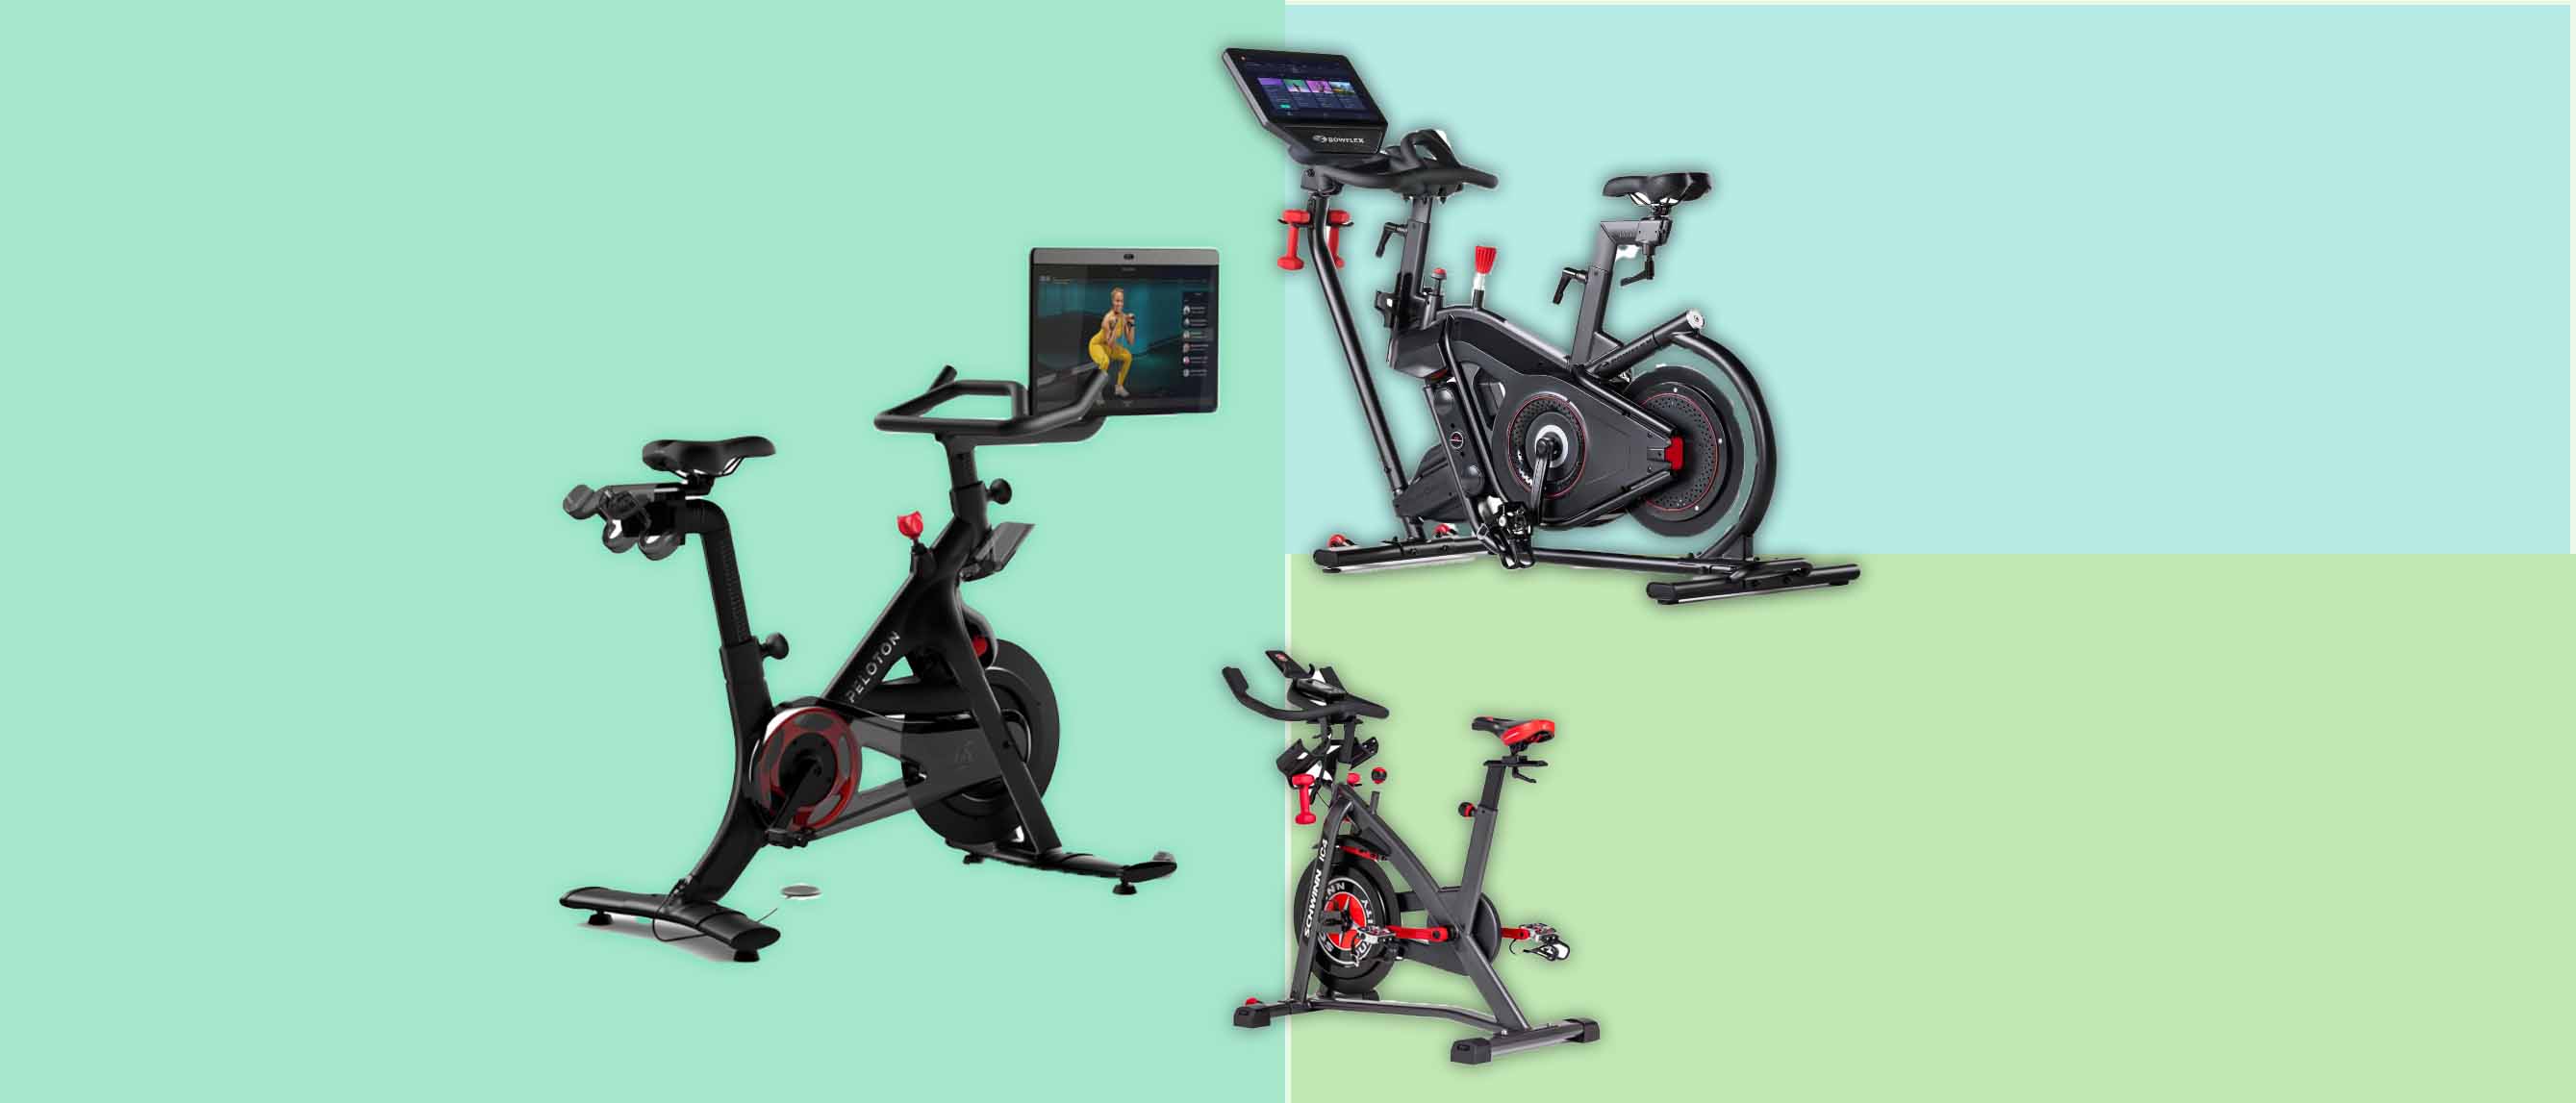 Three exercise bikes in a collage against a green grid background